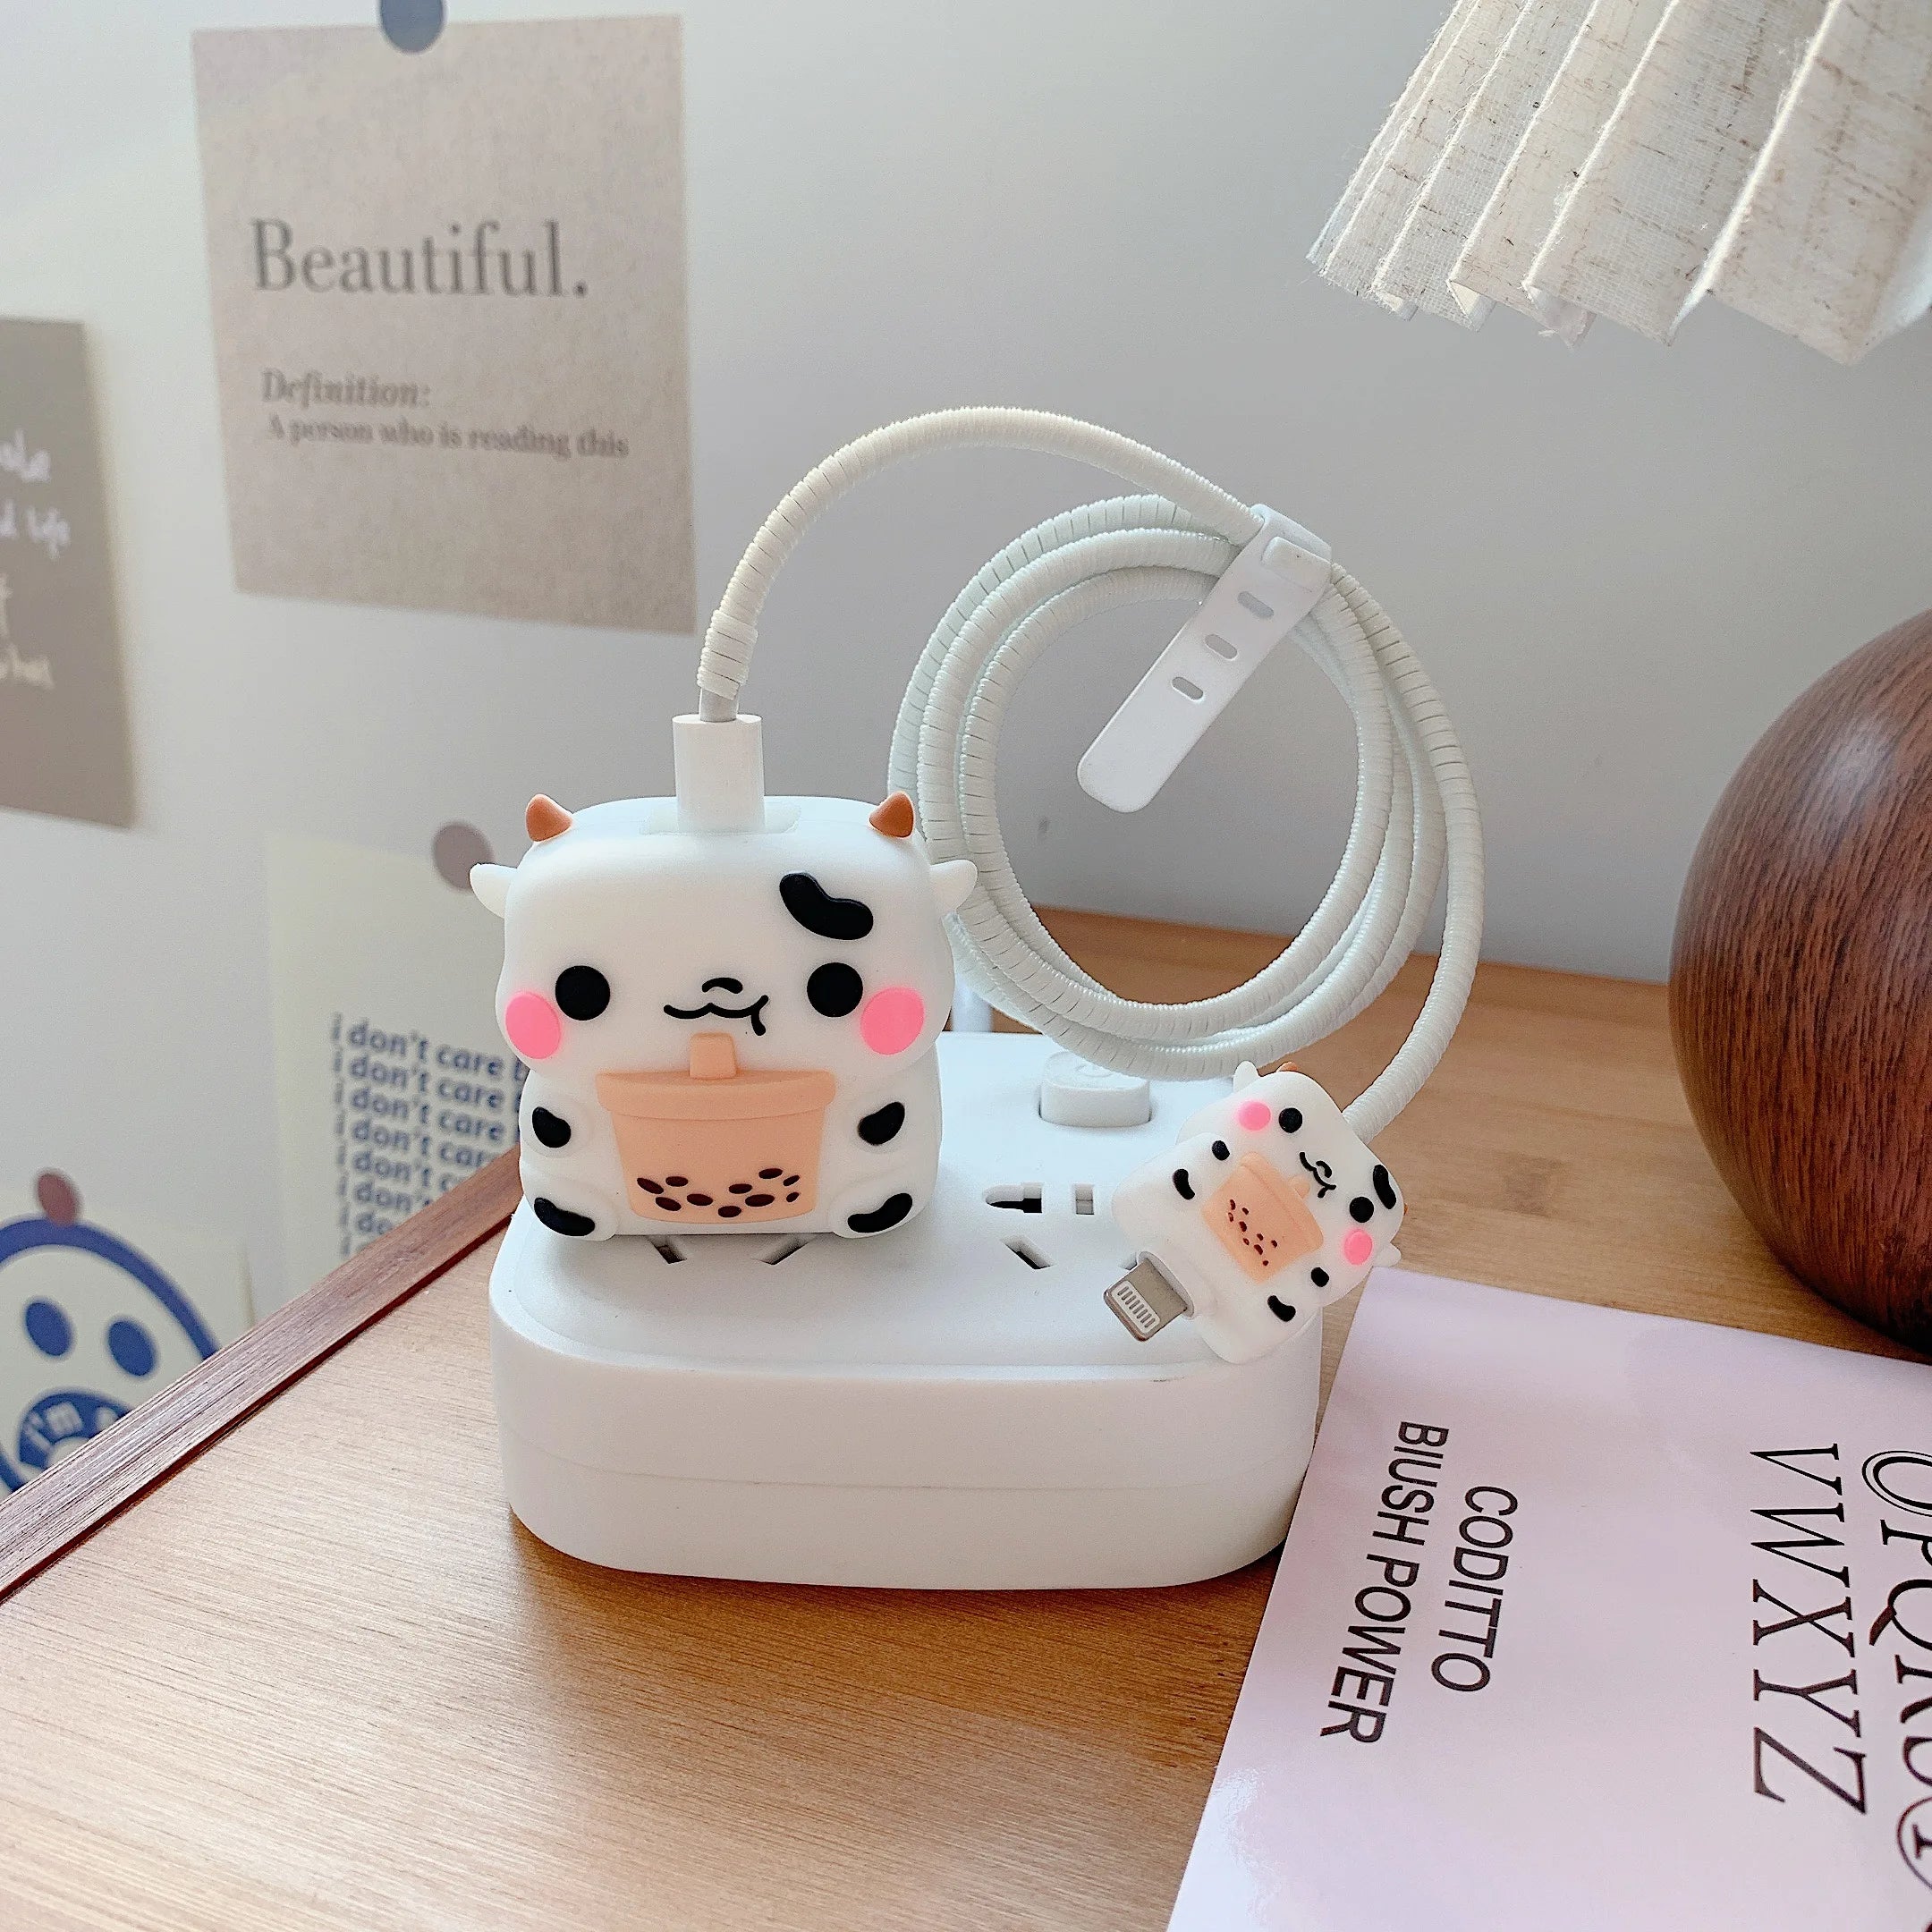 Iphone Charger Case Cover - Cutie Cow